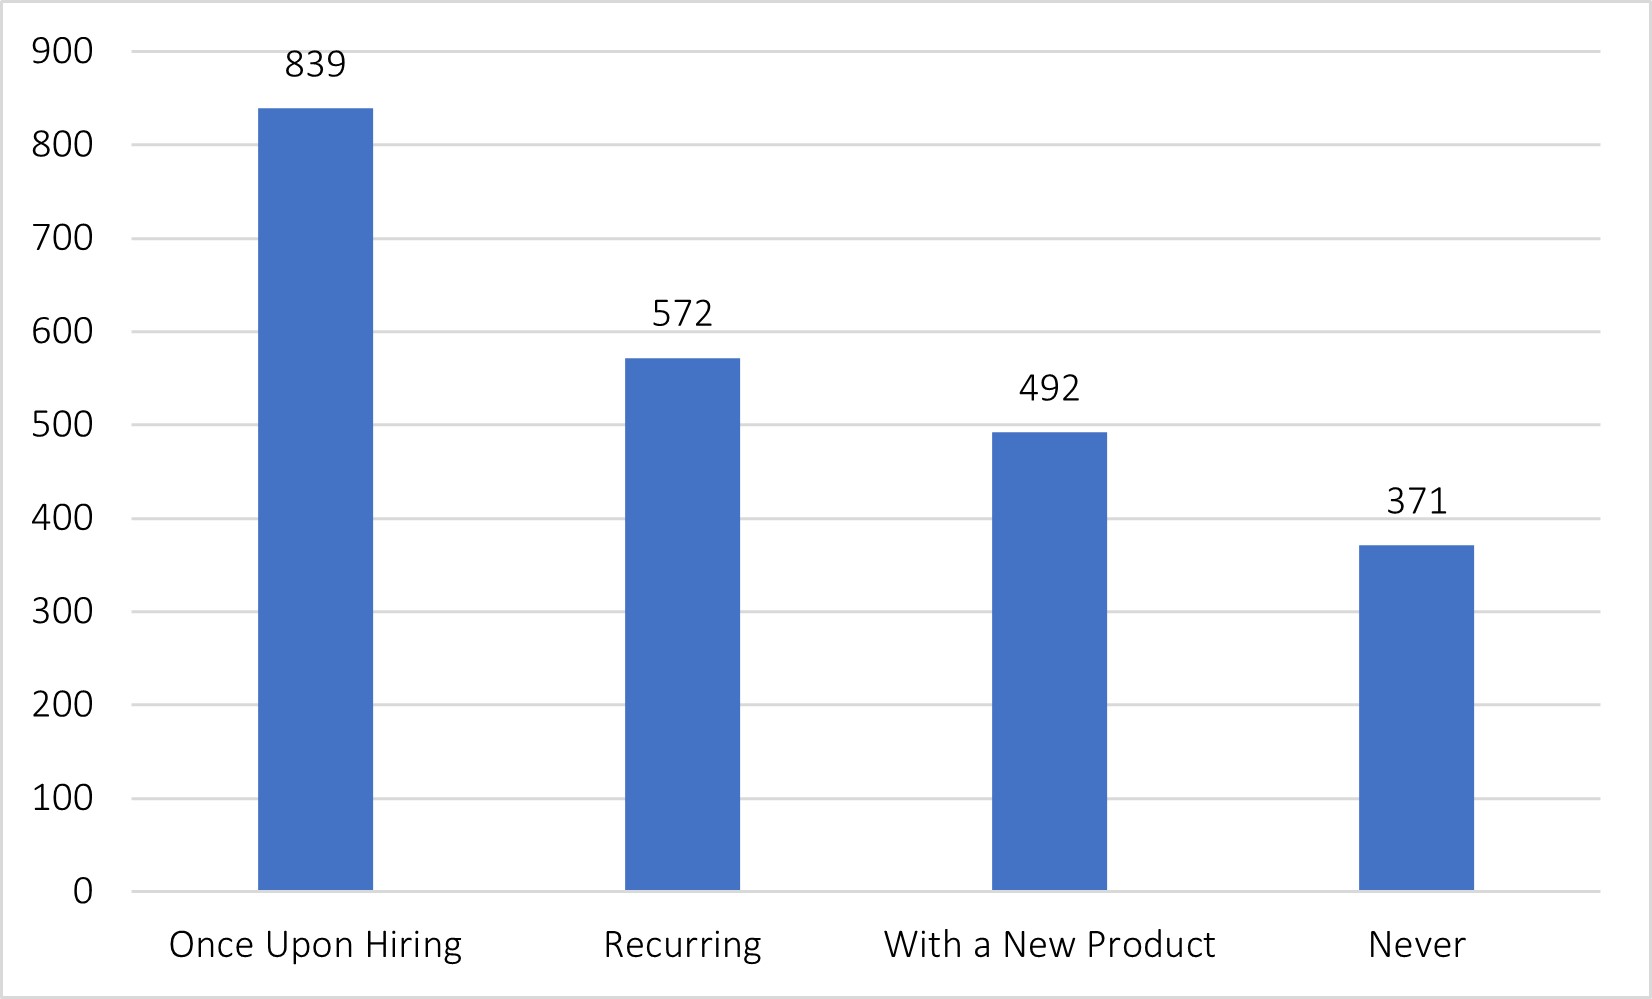 A bar graph showing "once upon hiring" as the top response.